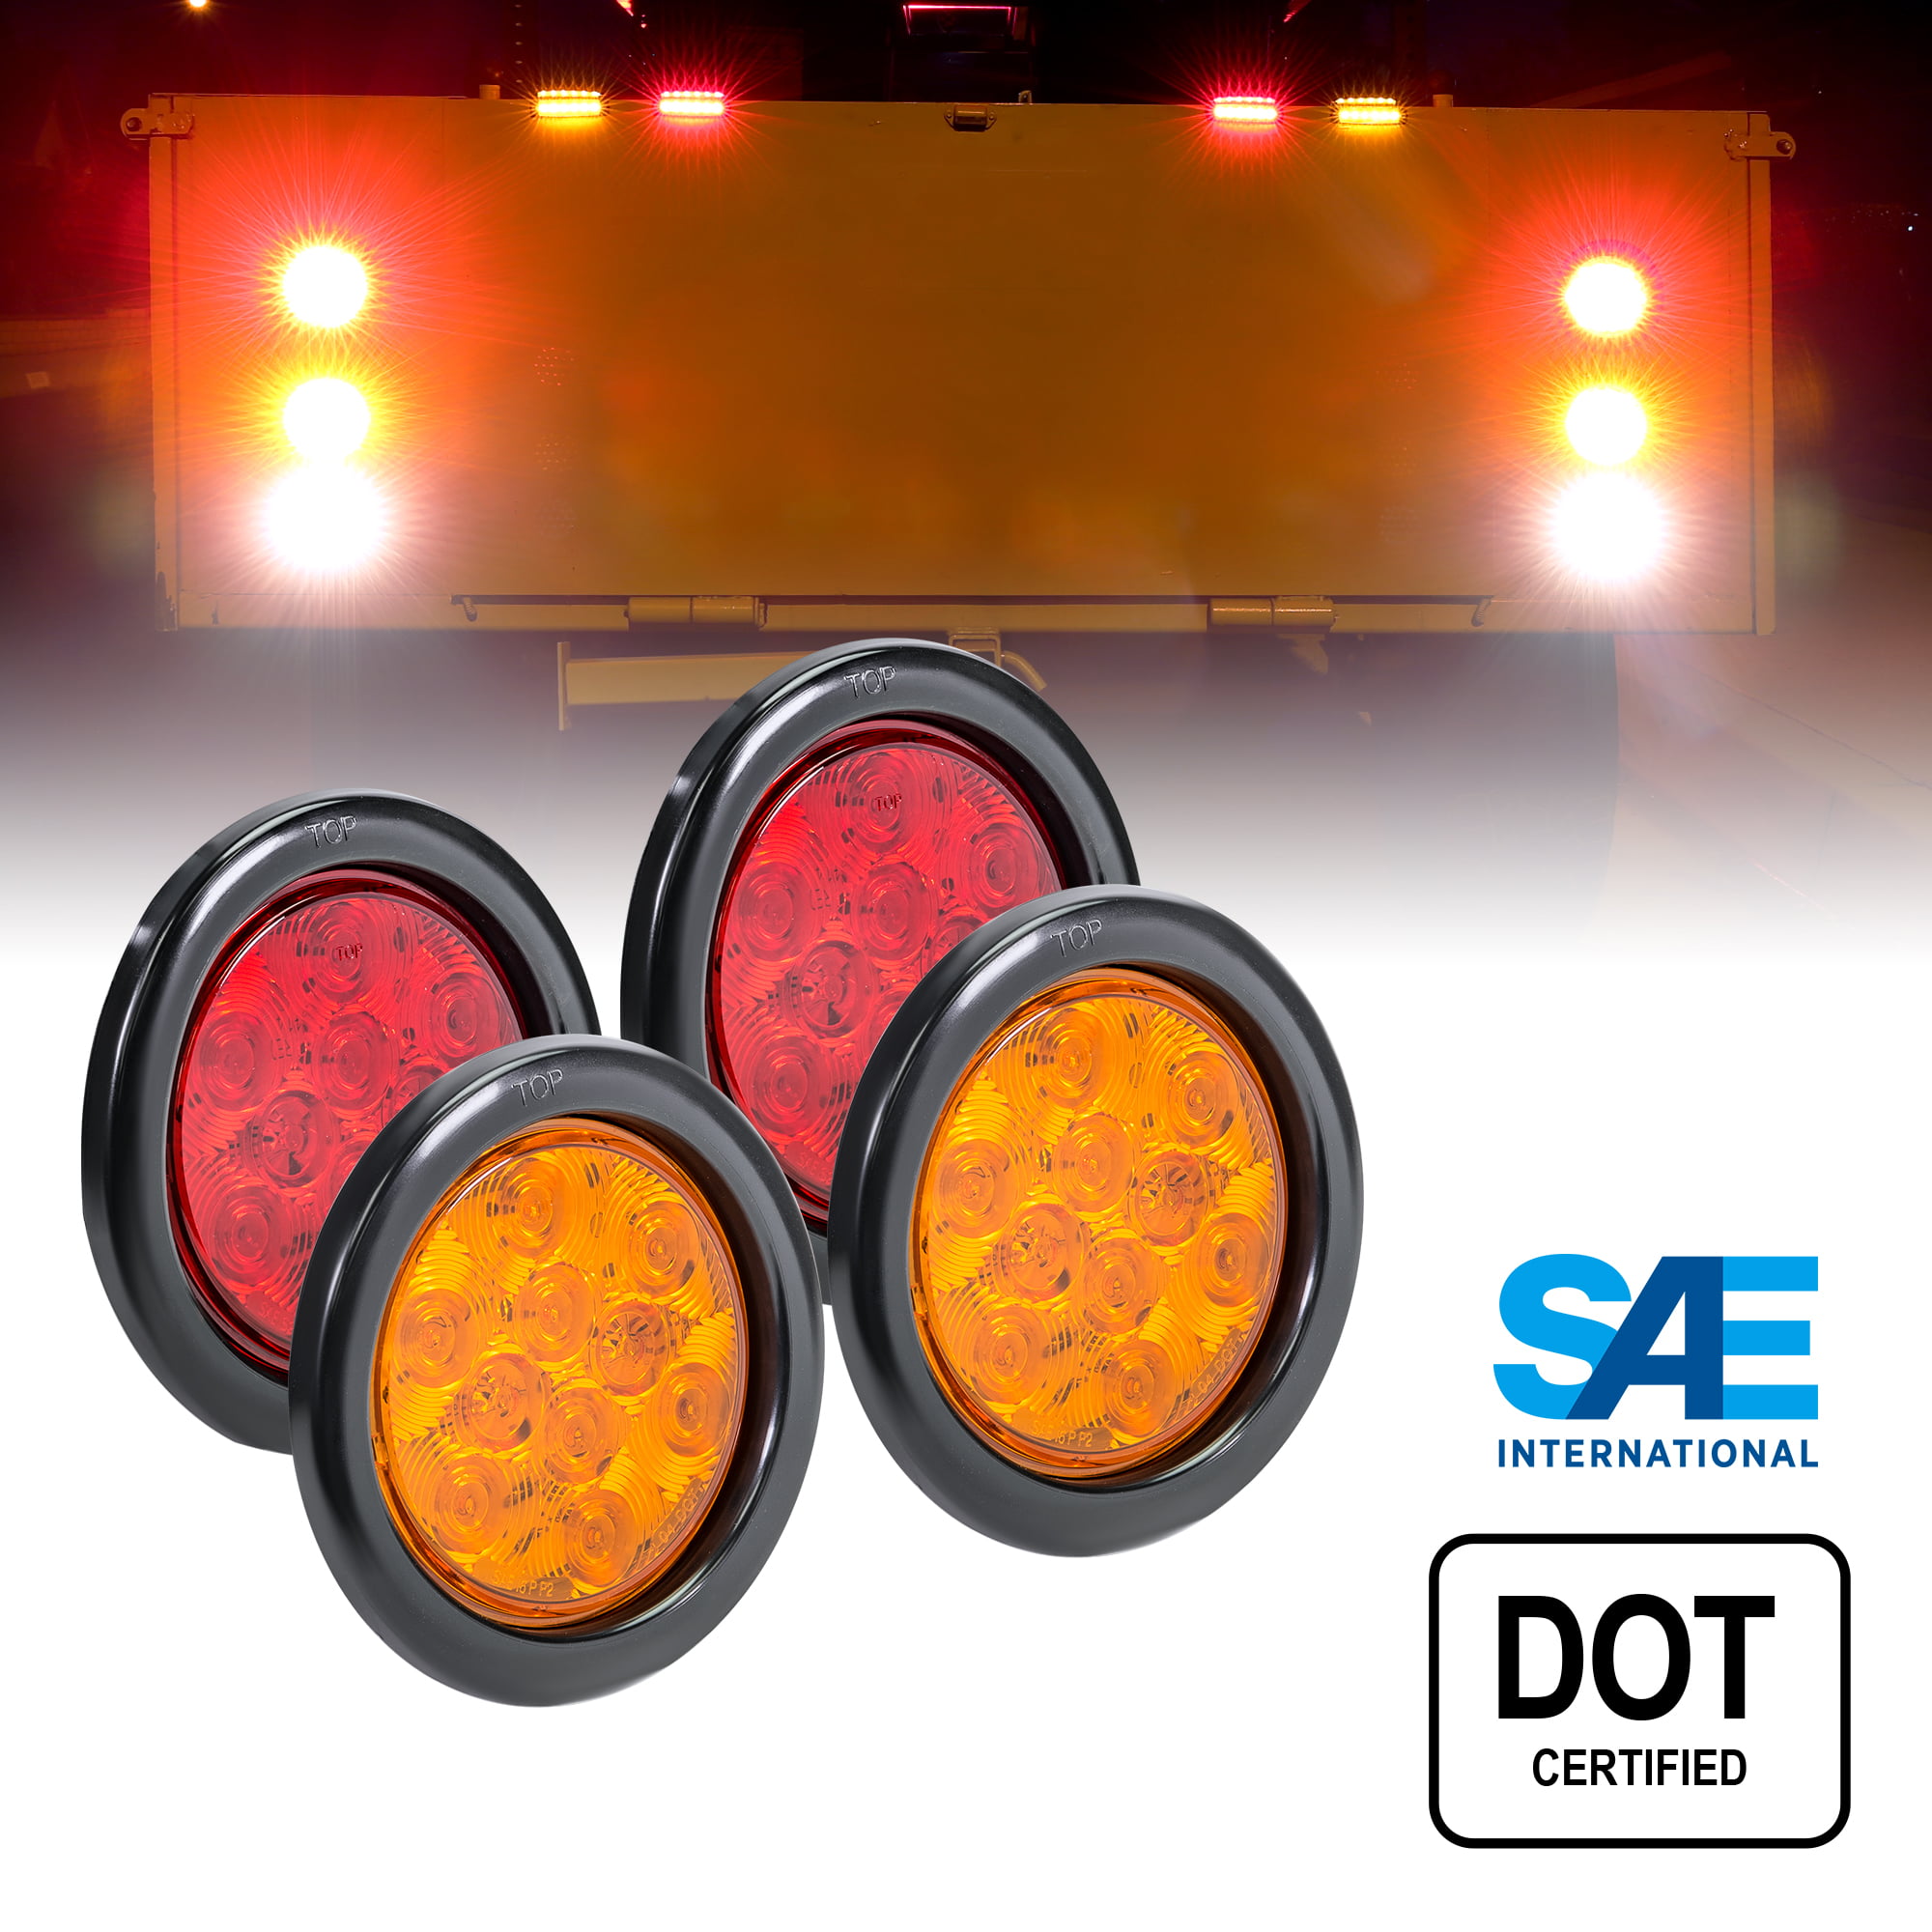 IP67 Waterproof 2 Red DOT Certified Stop Brake Turn Reverse Back Up Trailer Lights For RV Truck 2 White 4 Round LED Trailer Tail Light Kit 2 Amber Grommets & Plugs Included 